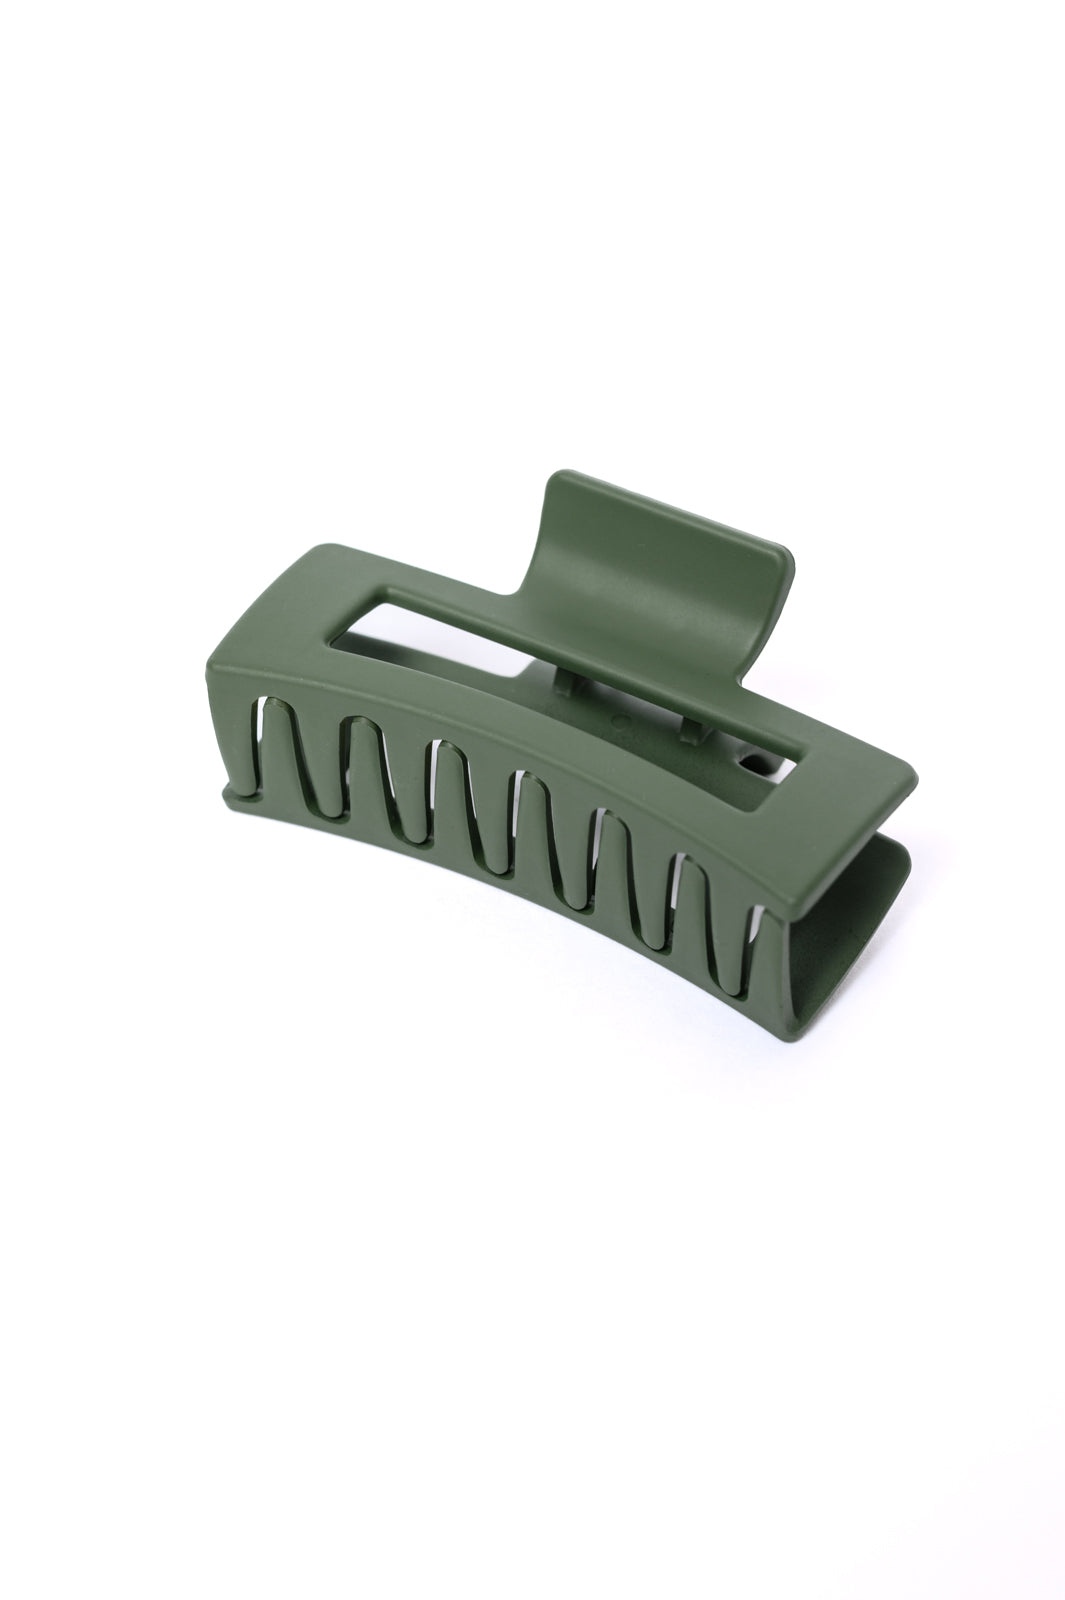 Claw Clip Set of 4 in Forest Green (Ships in 1-2 Weeks) - 2/13